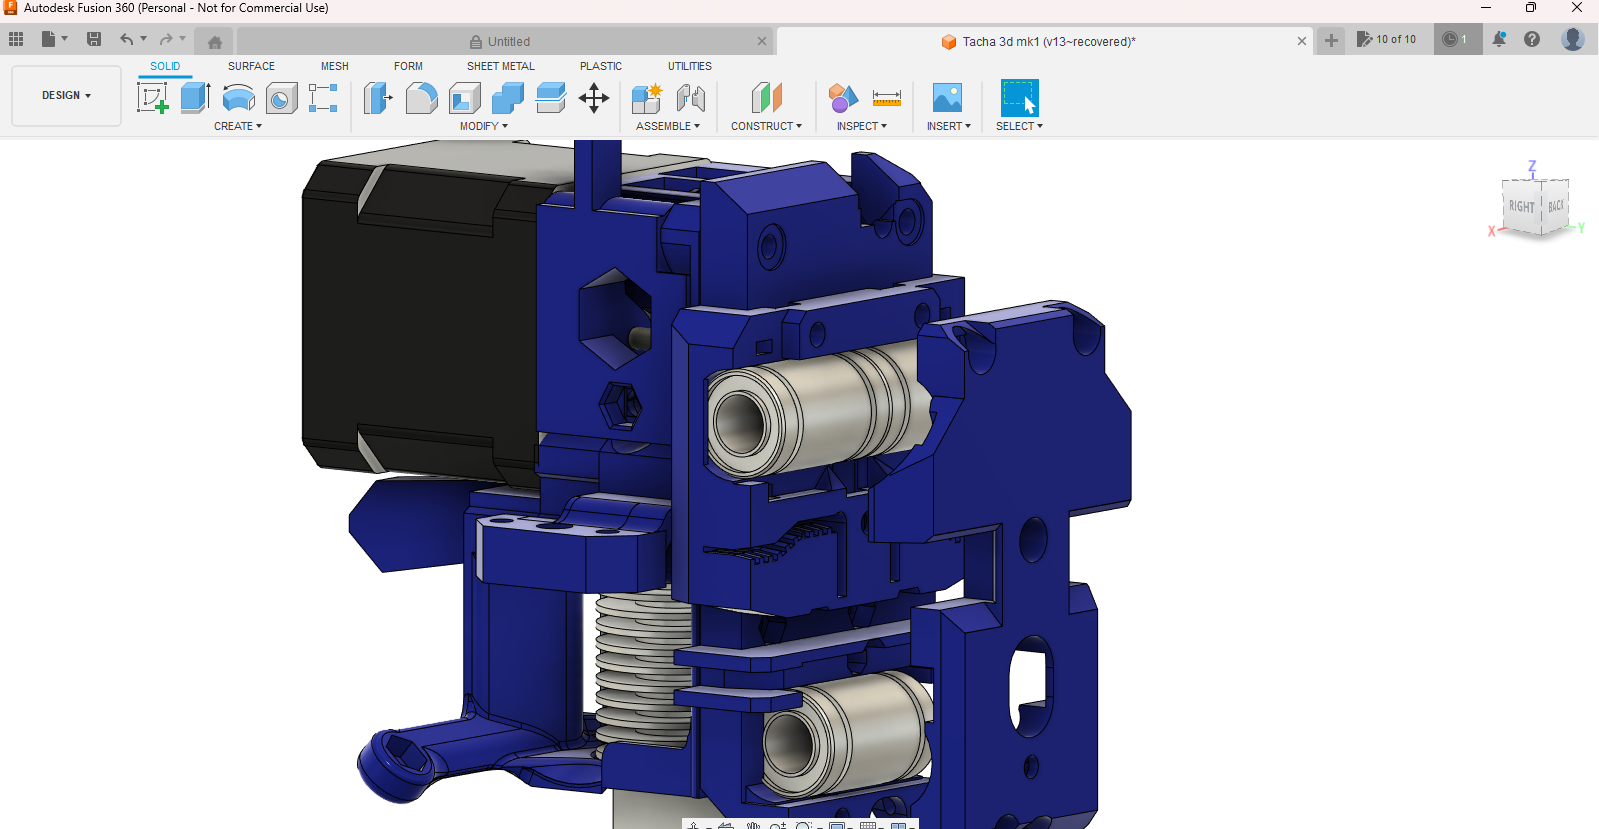 Autodesk Fusion 360 (Personal - Not for Commercial Use) 6_29_2023 10_08_56 PM.png